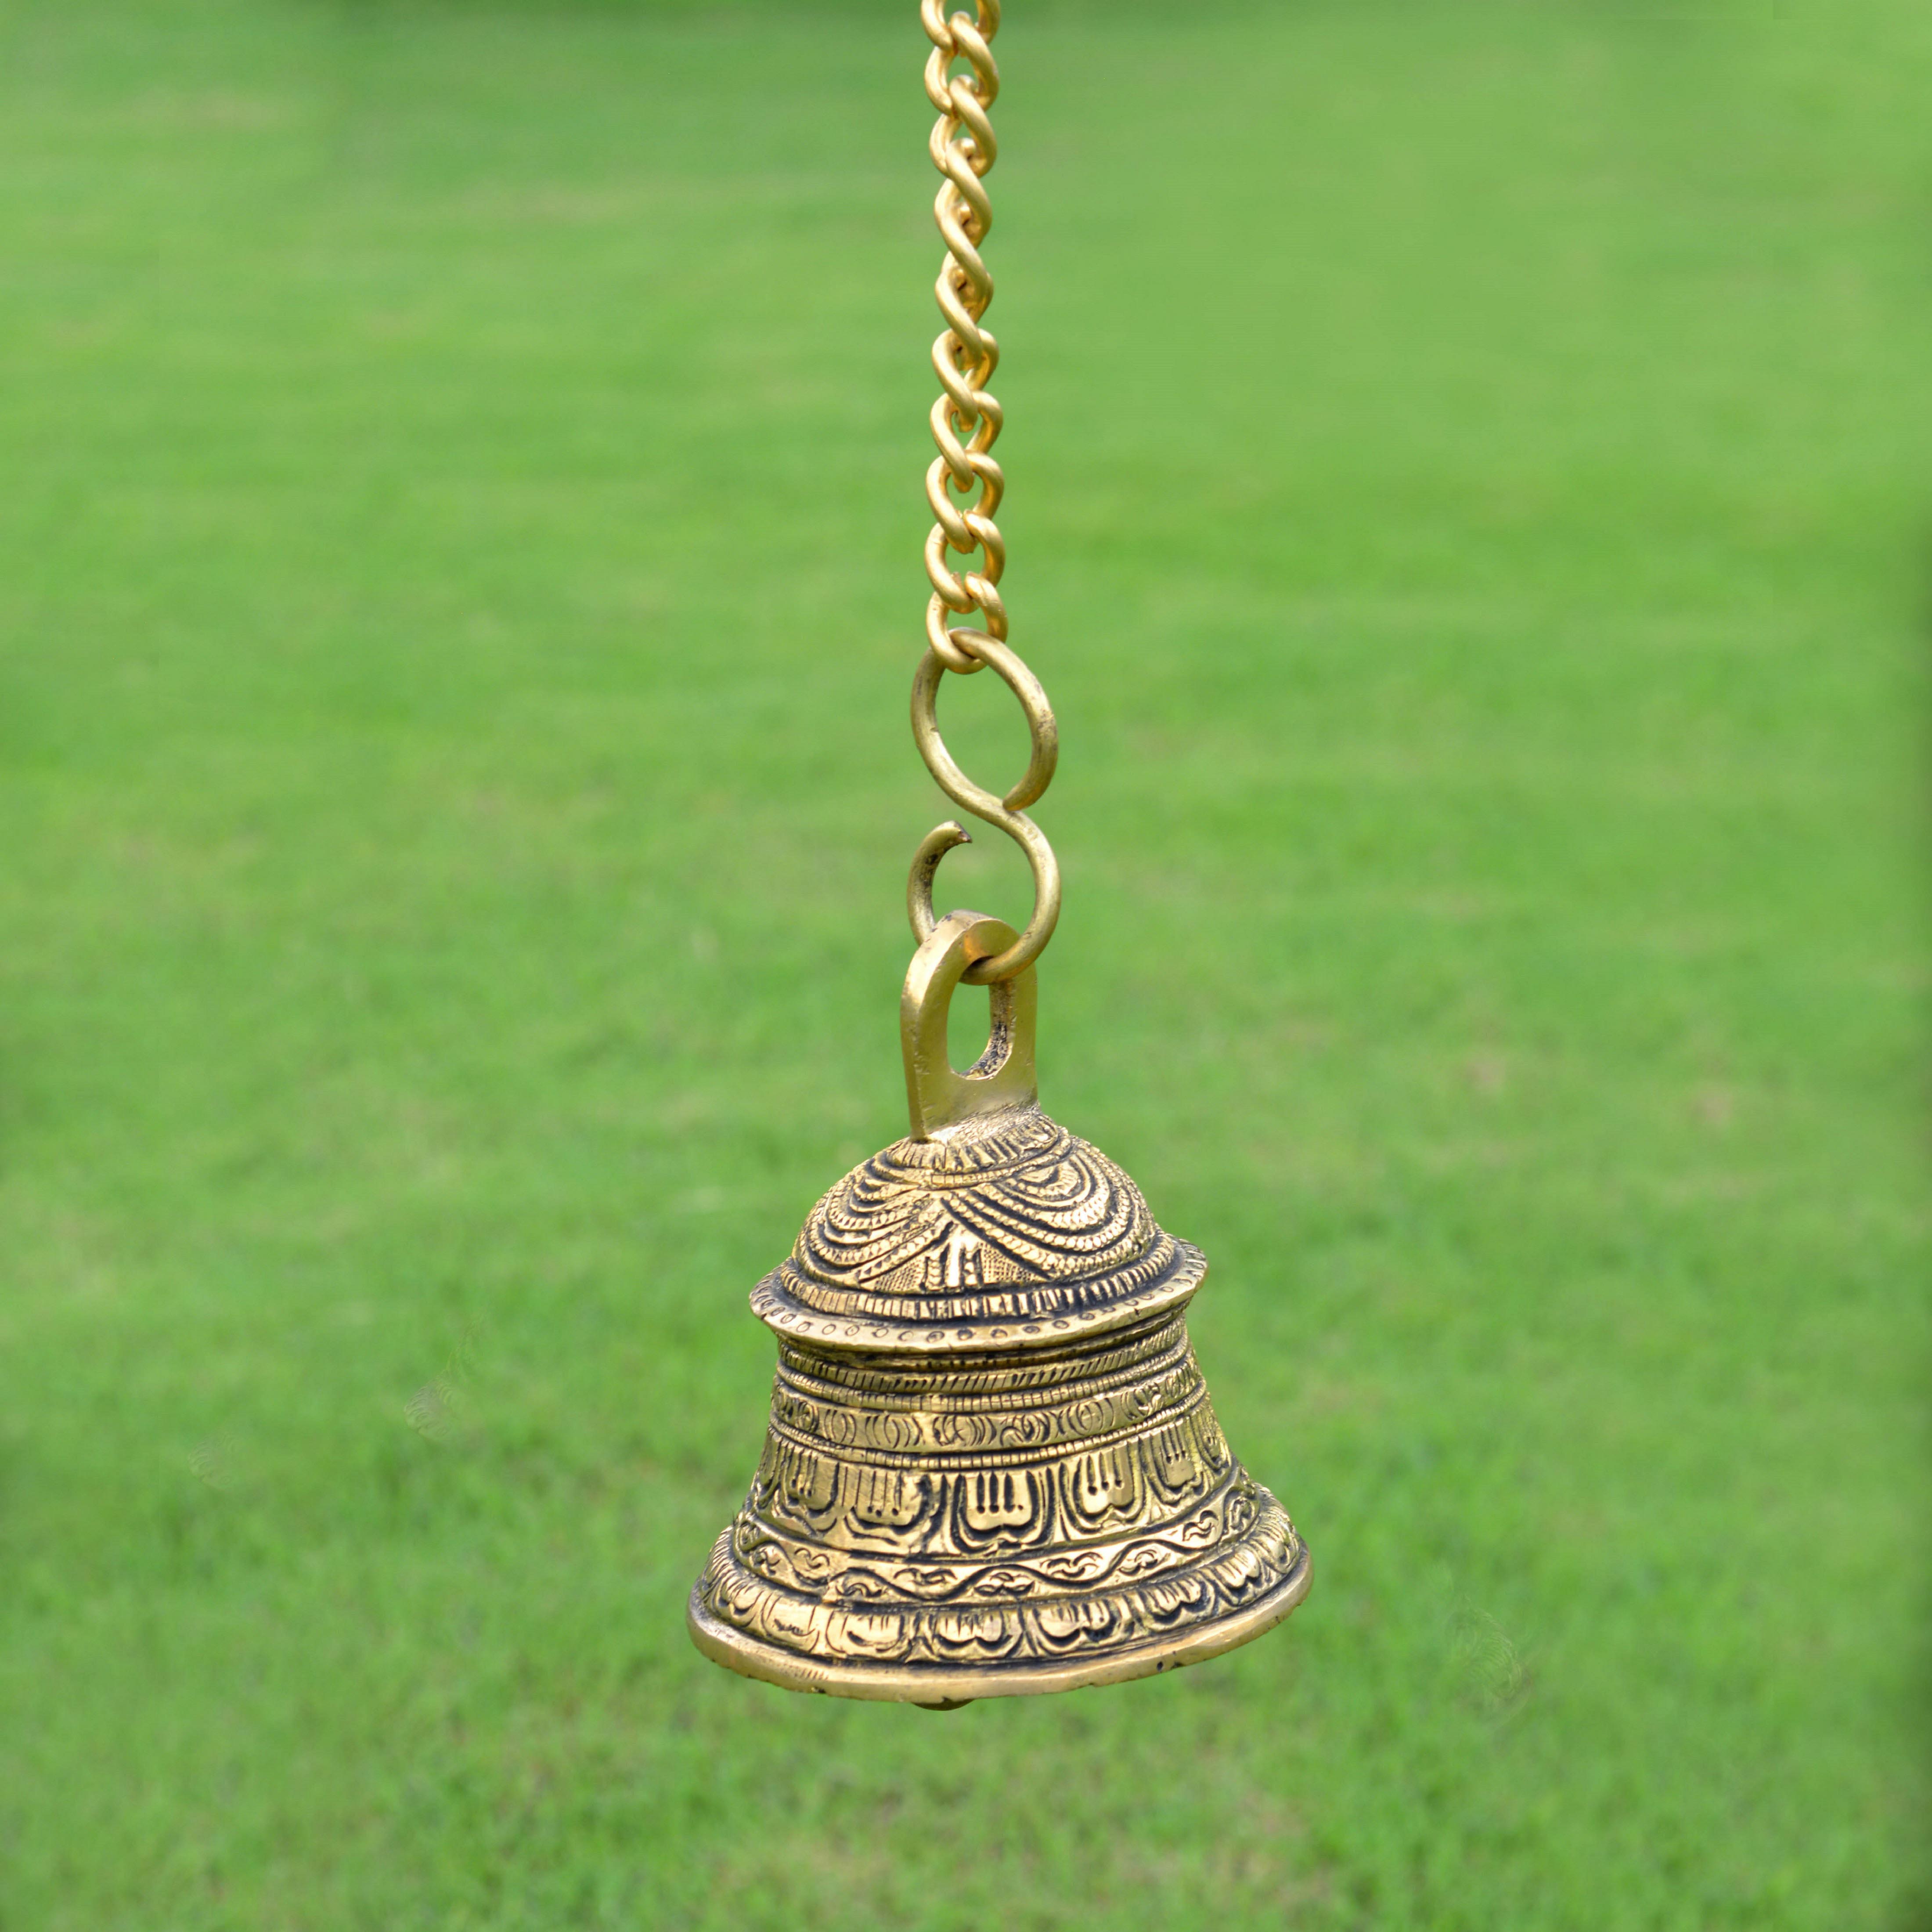 Brass hanging metal bells for religious and decor or gift use - Buy ...